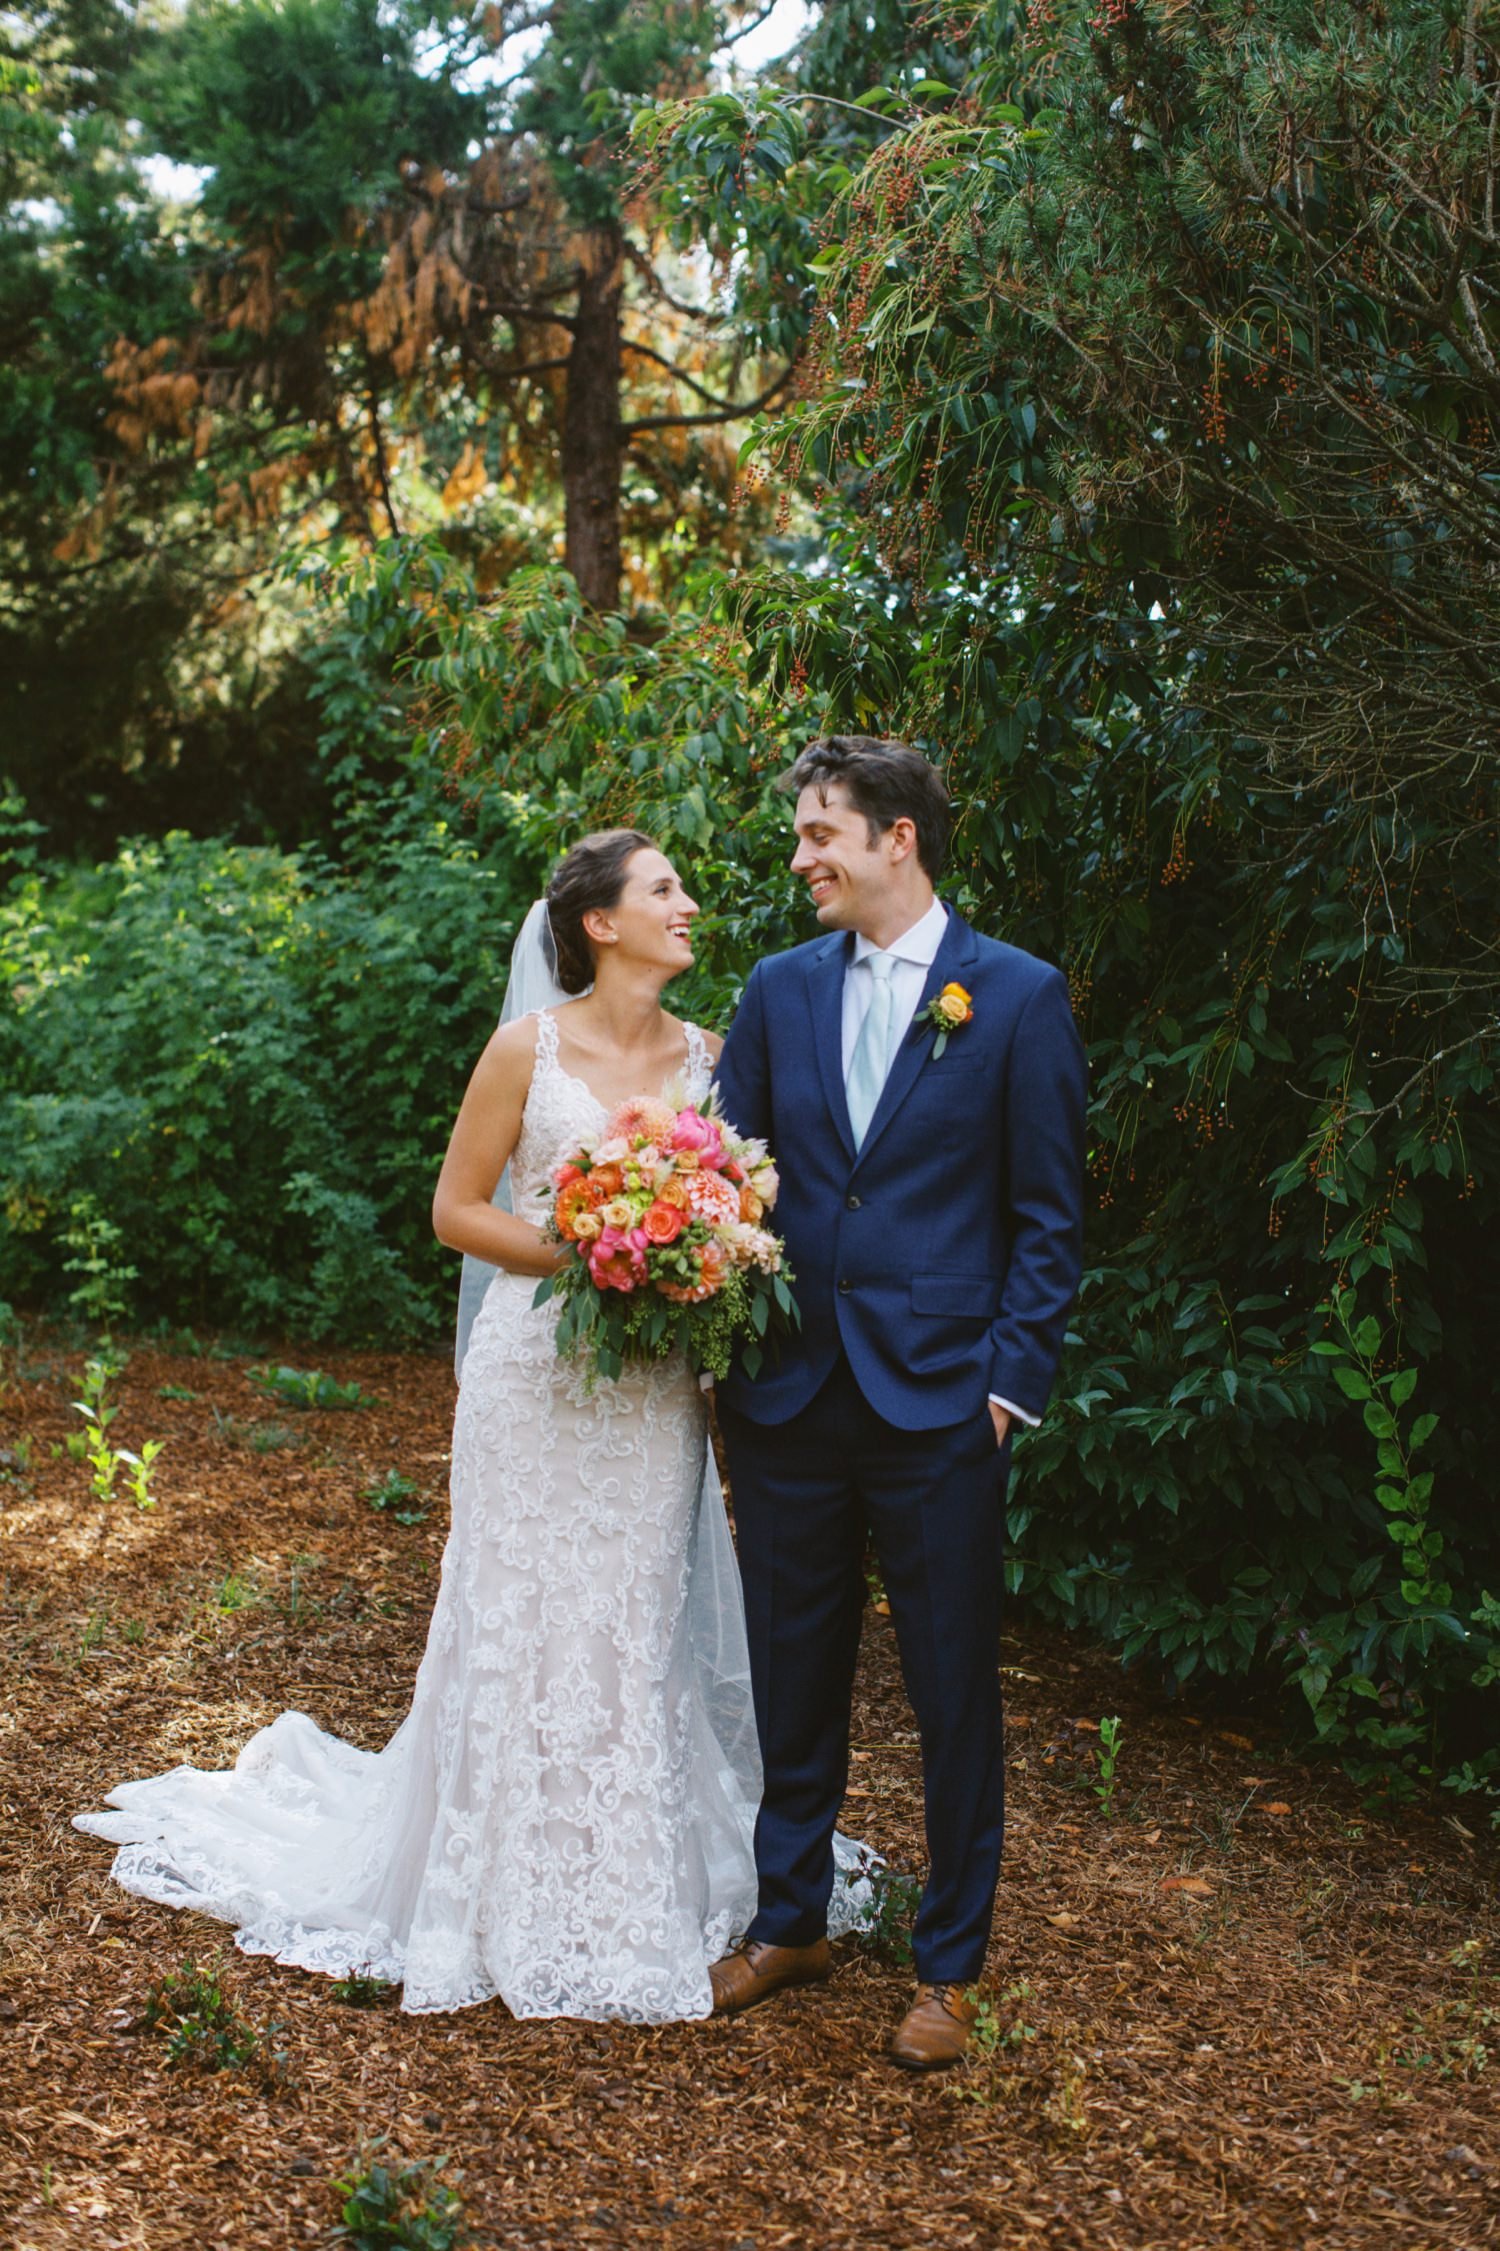  bride in white dress holding bouquet of pink and orange flowers stands next to and smiles at groom in navy blue suit 